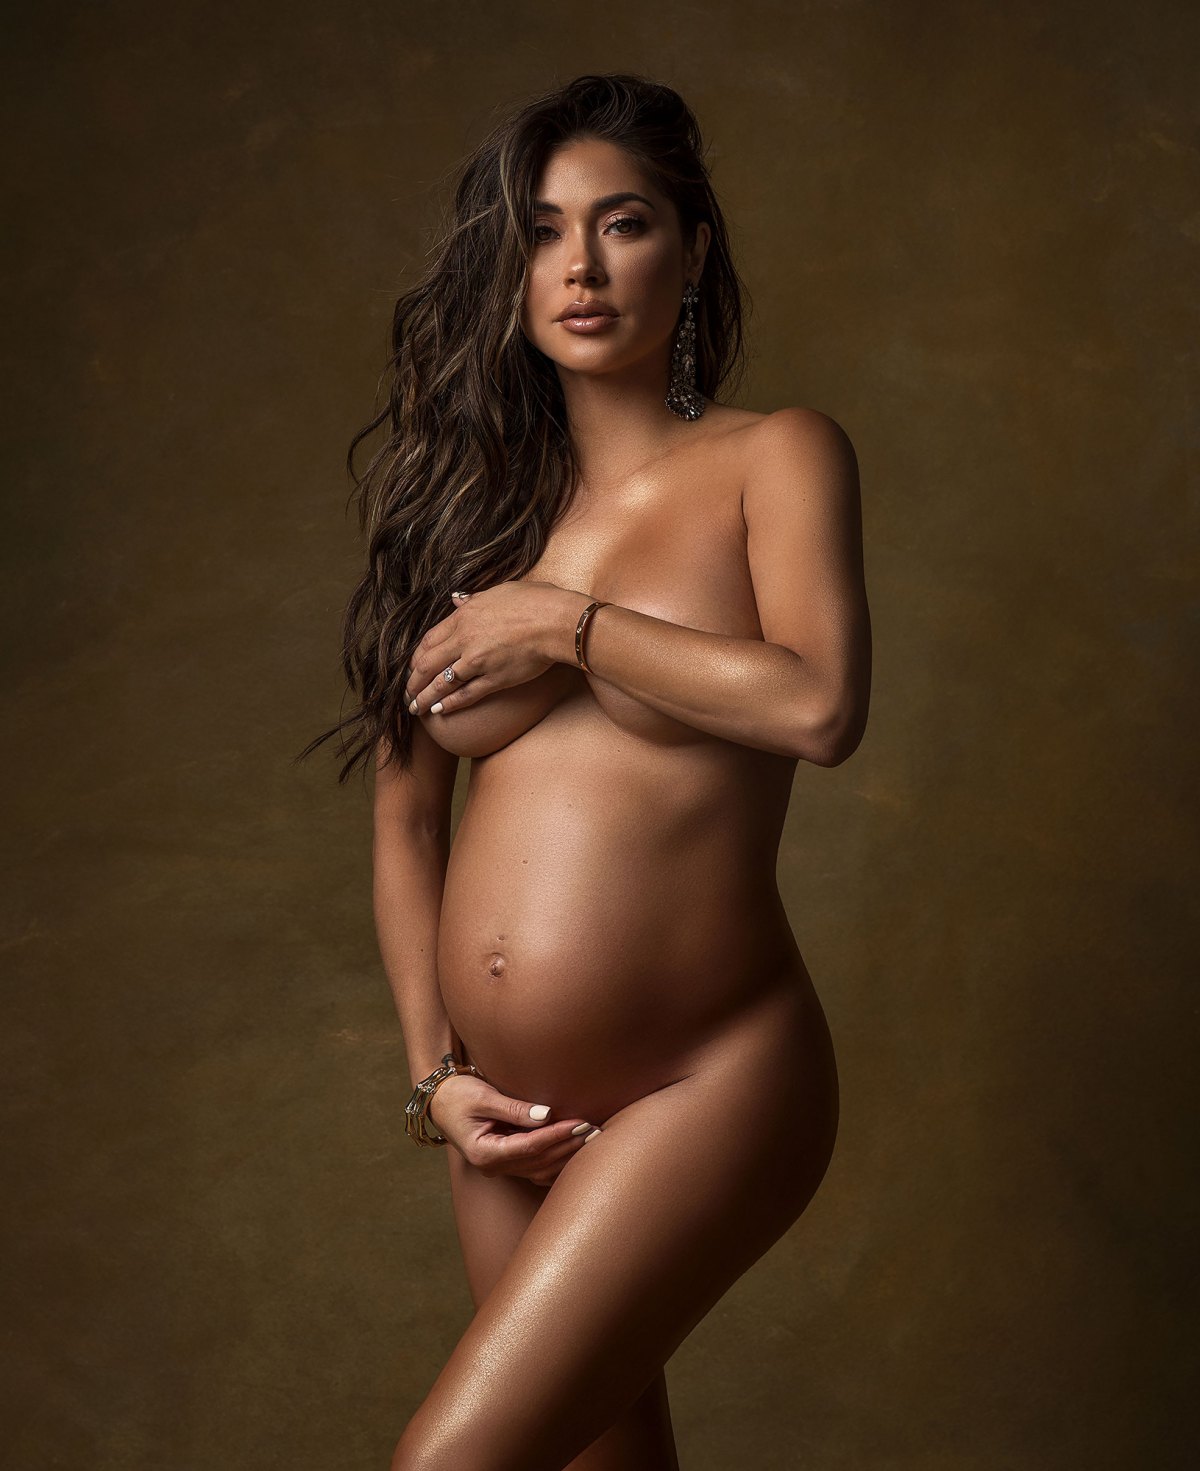 Happy Pregnant Naked - Celebrities Posing Nude While Pregnant: Maternity Pics